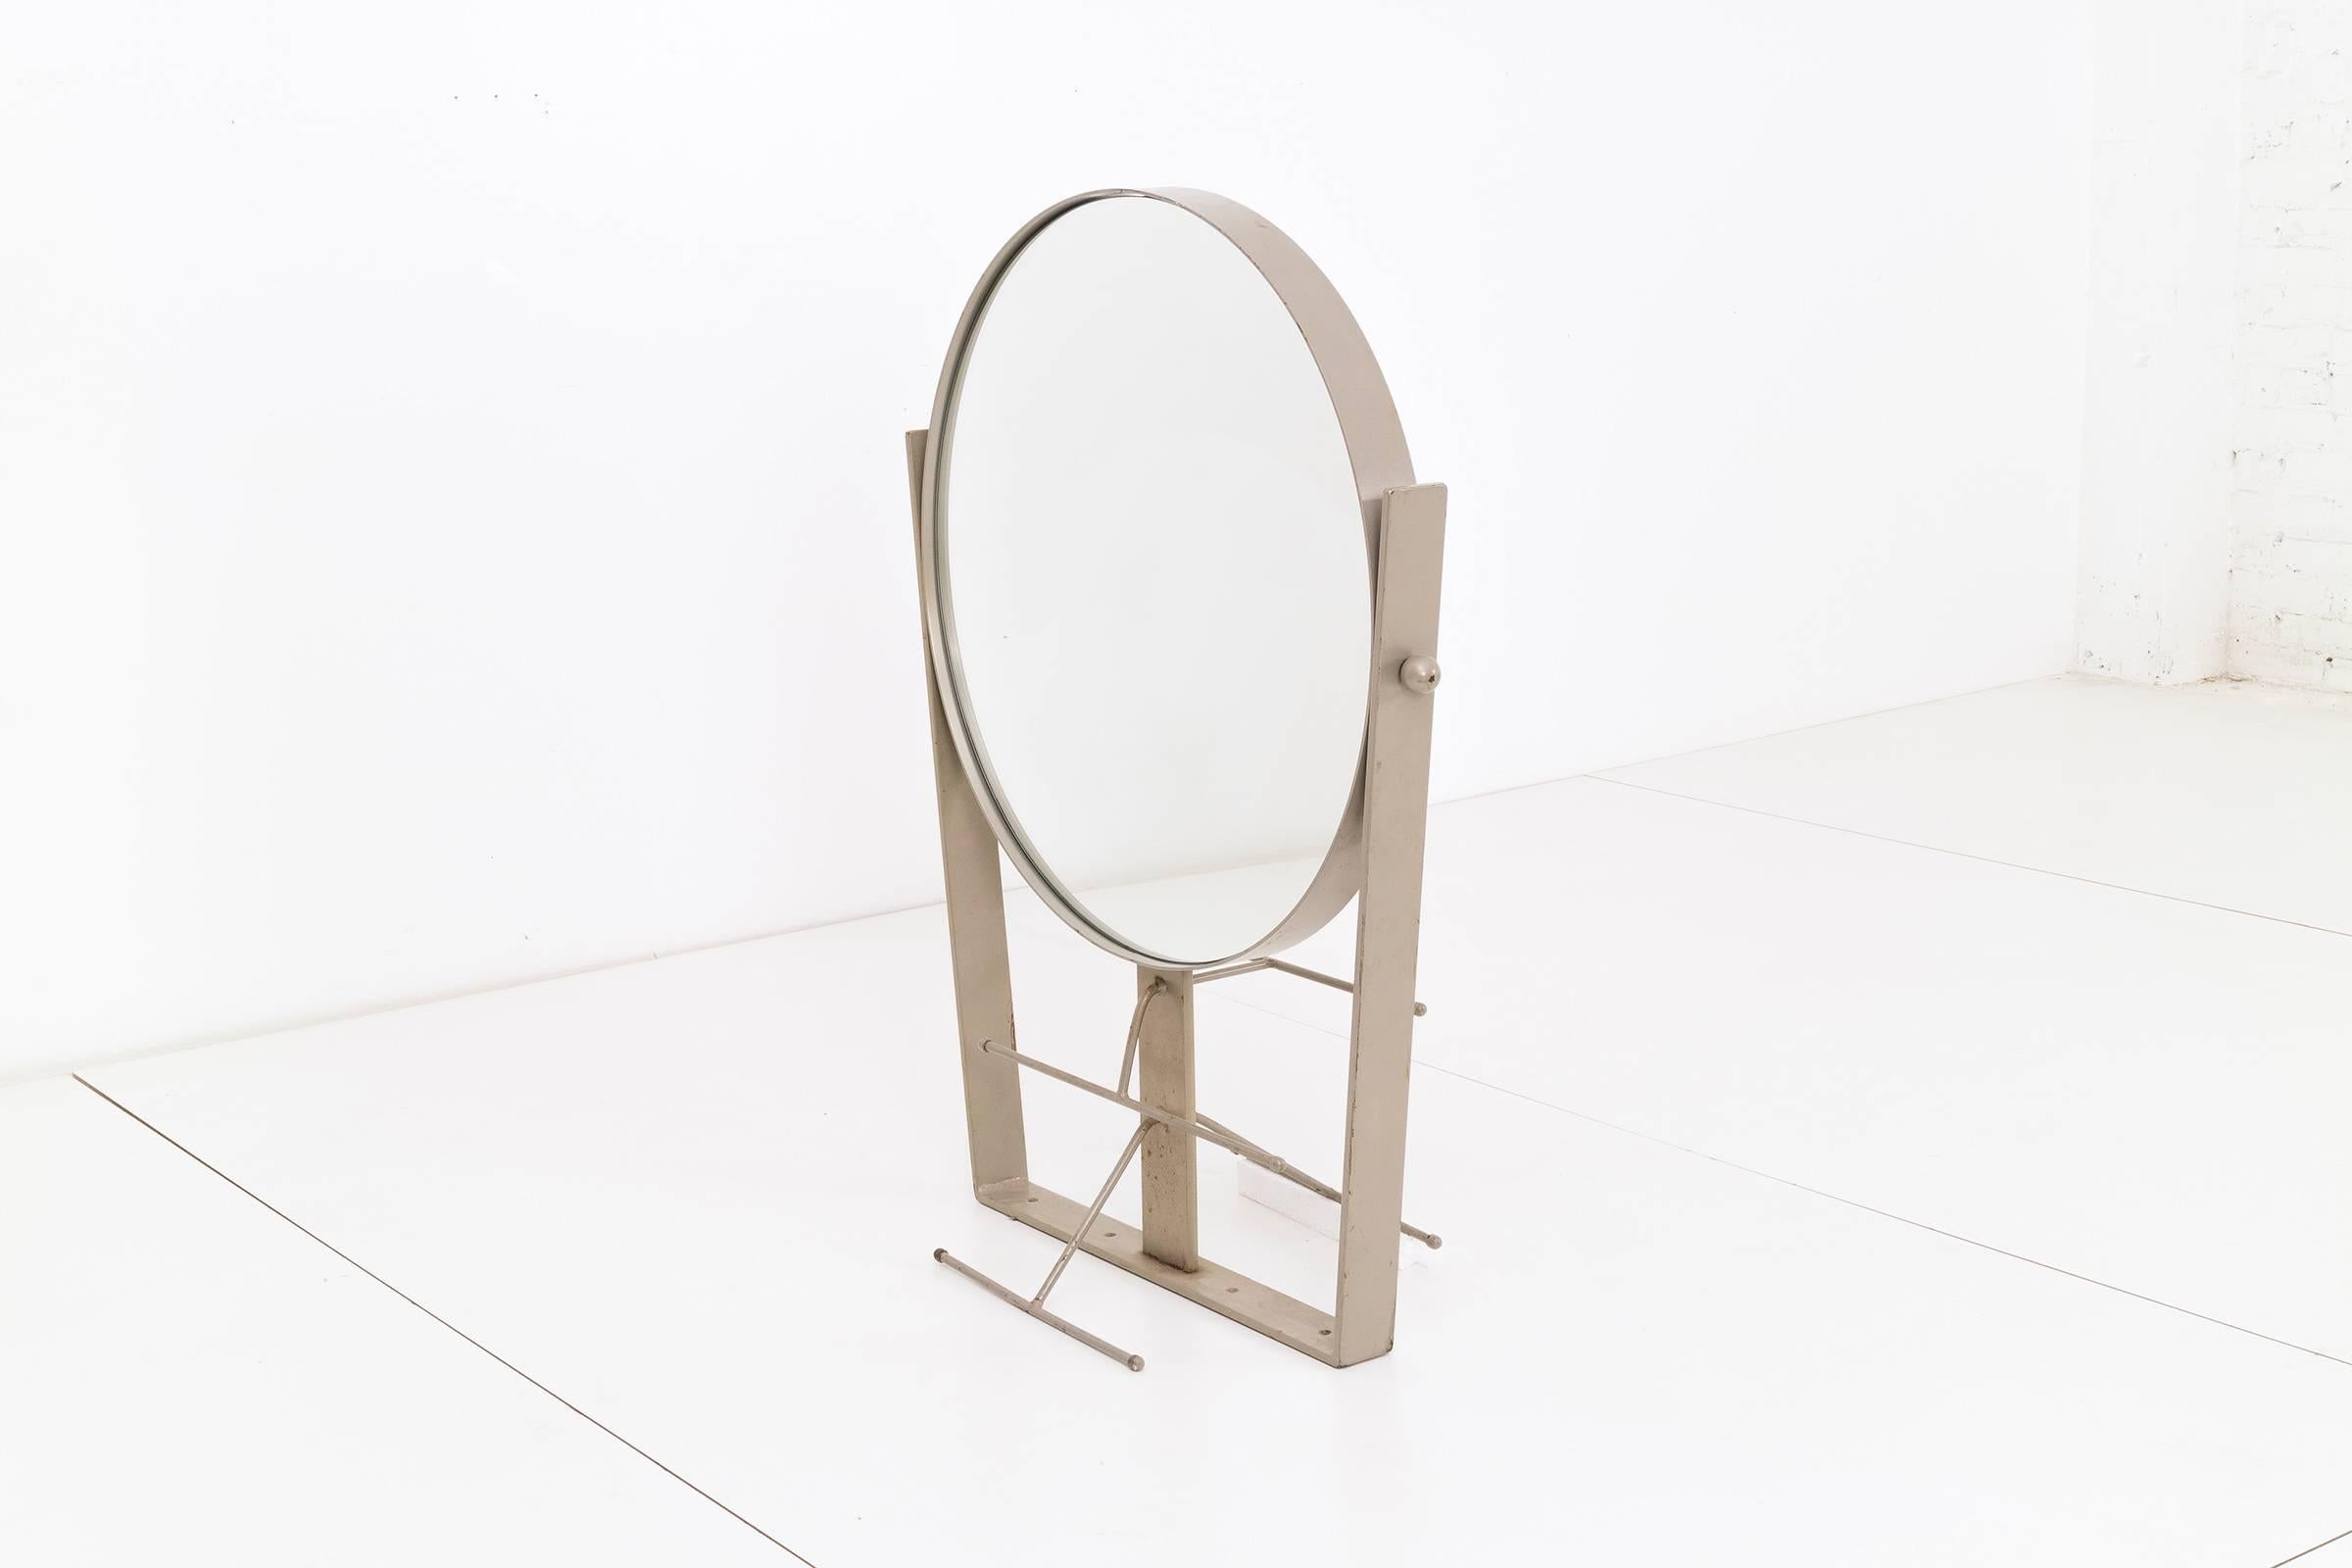 Naval mirror, heavy gauge metal with large two-sided round mirror, can be secured on most surfaces and or walls.
 